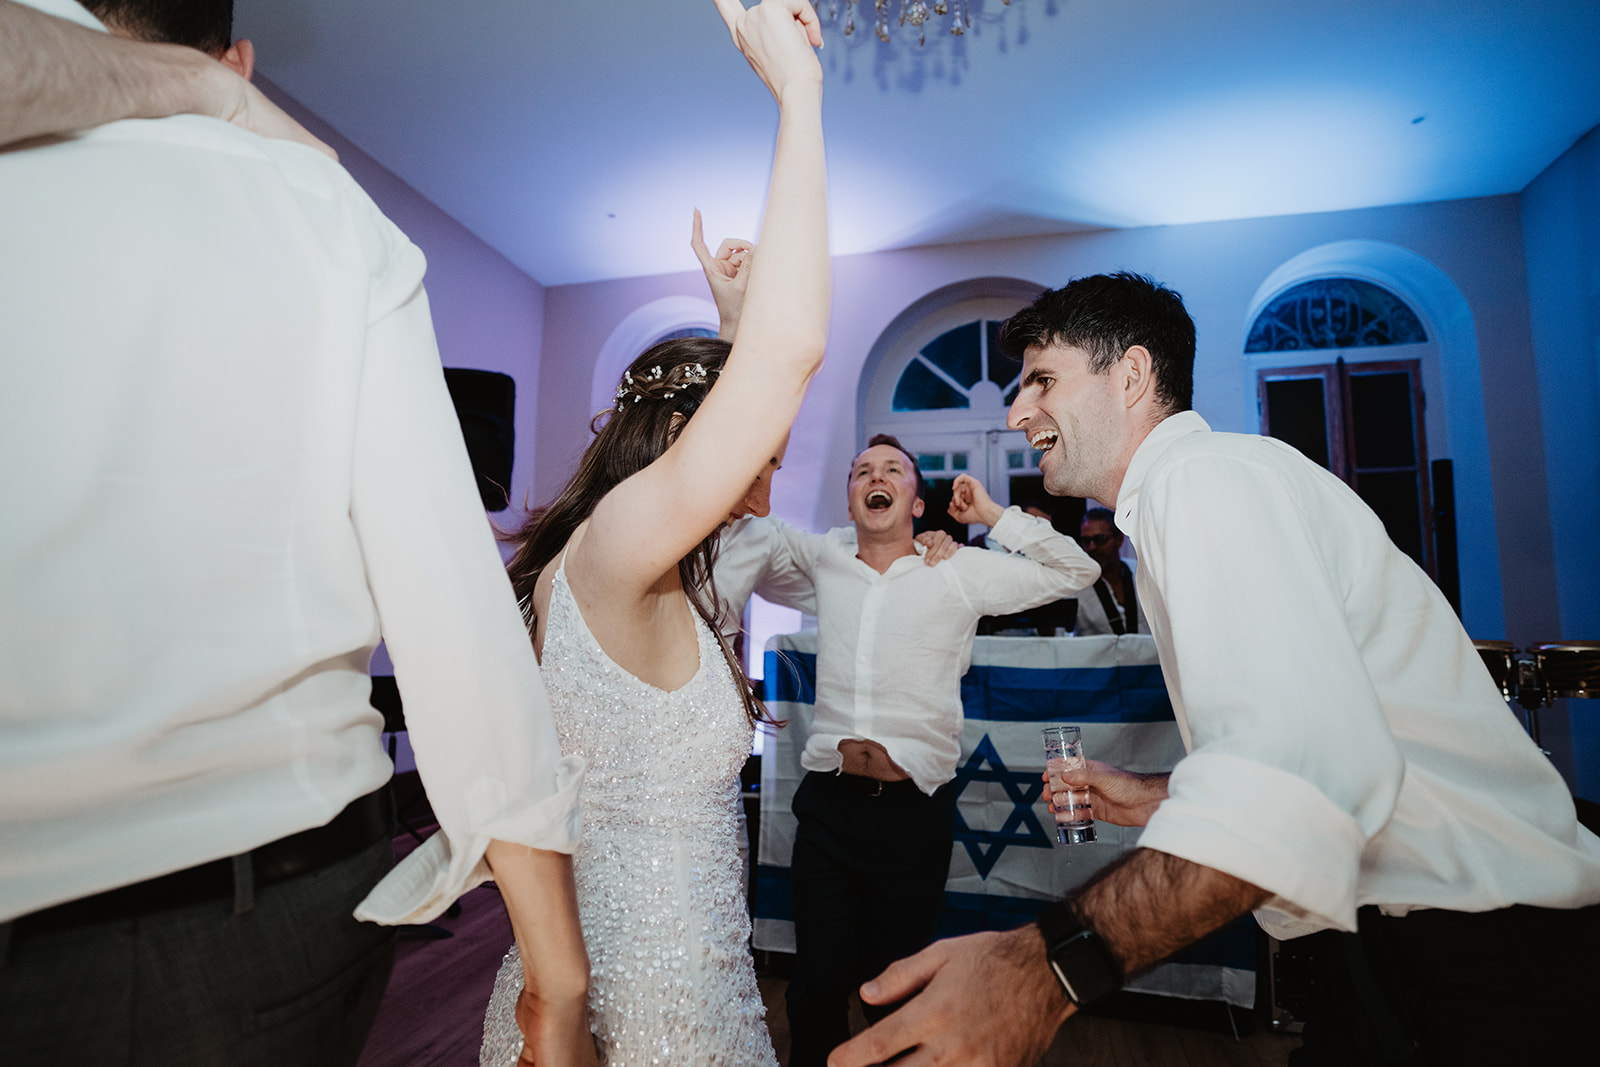 French wedding photos and video duo Bordeaux dancing party fun chateau fengari